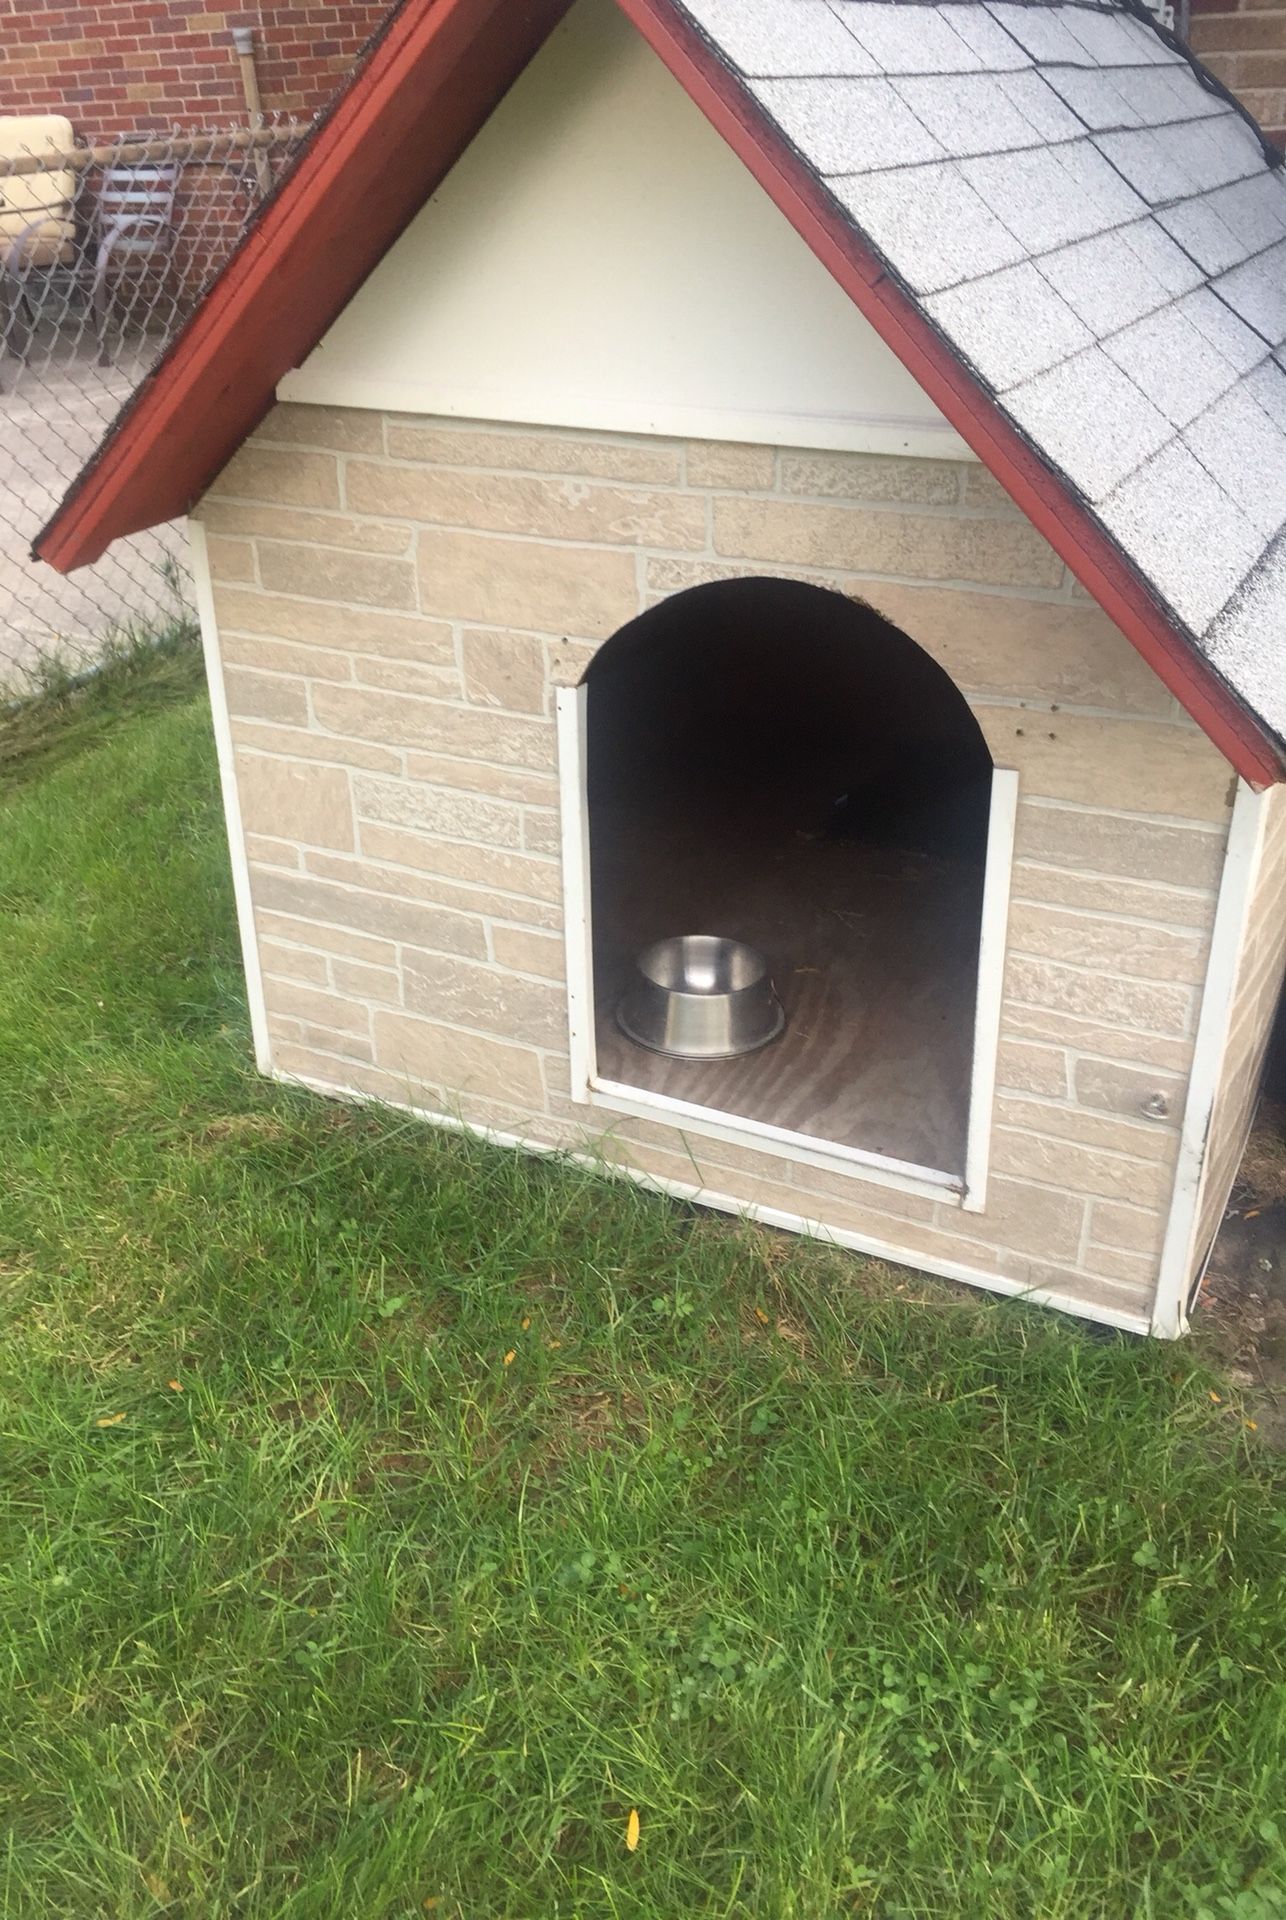 Large Dog House with Heat Lamp $200